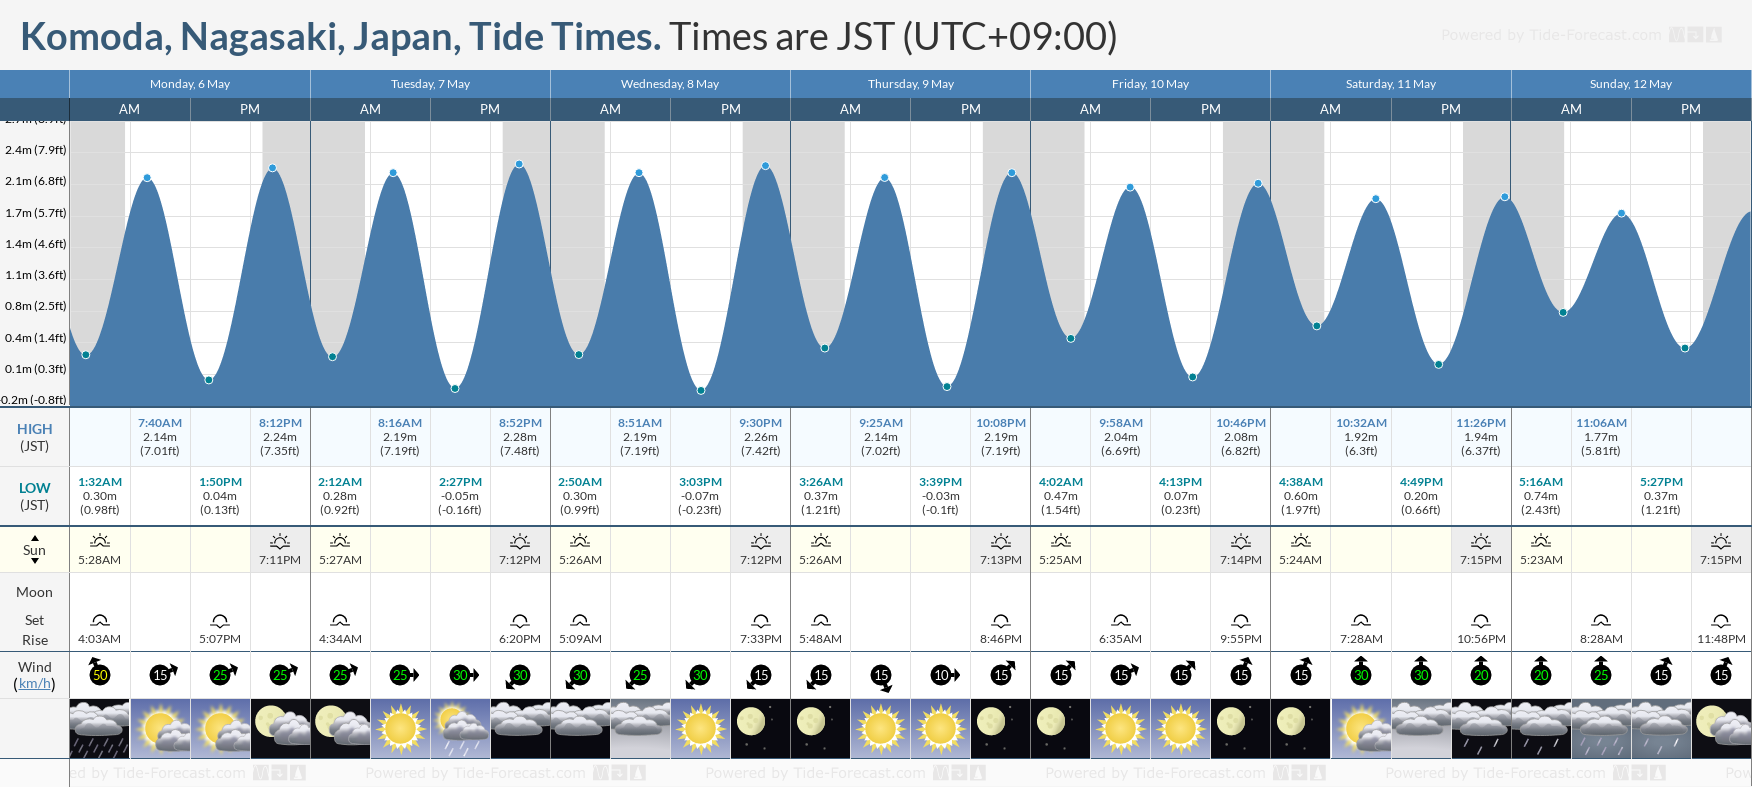 Komoda, Nagasaki, Japan Tide Chart including high and low tide times for the next 7 days